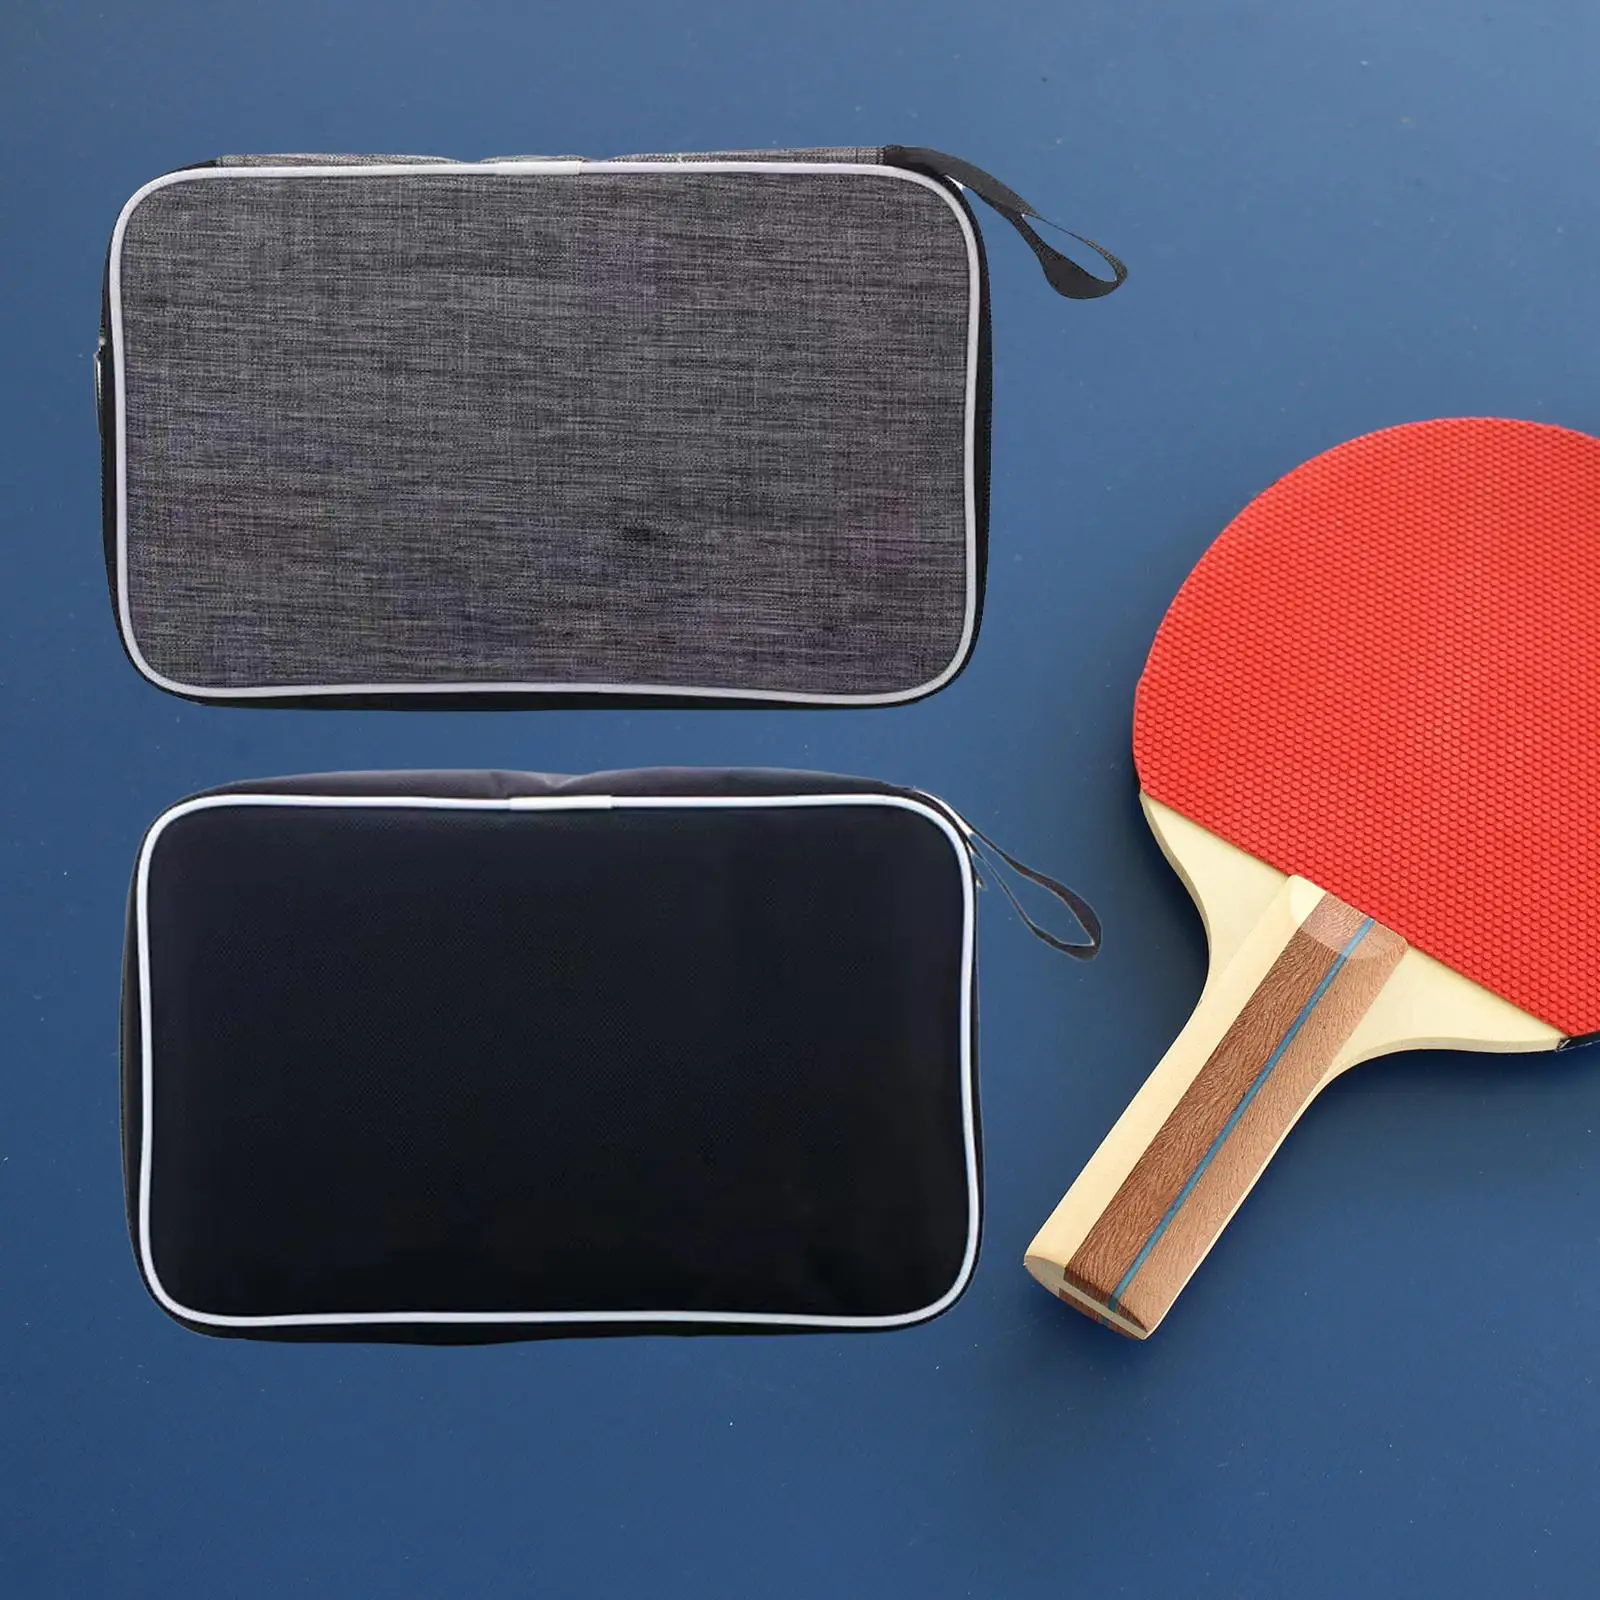 Ping Pong Paddles Case Portable Reusable Lightweight Ping Pong Paddle Cover Table Tennis Paddle Case for Travel Indoor Training